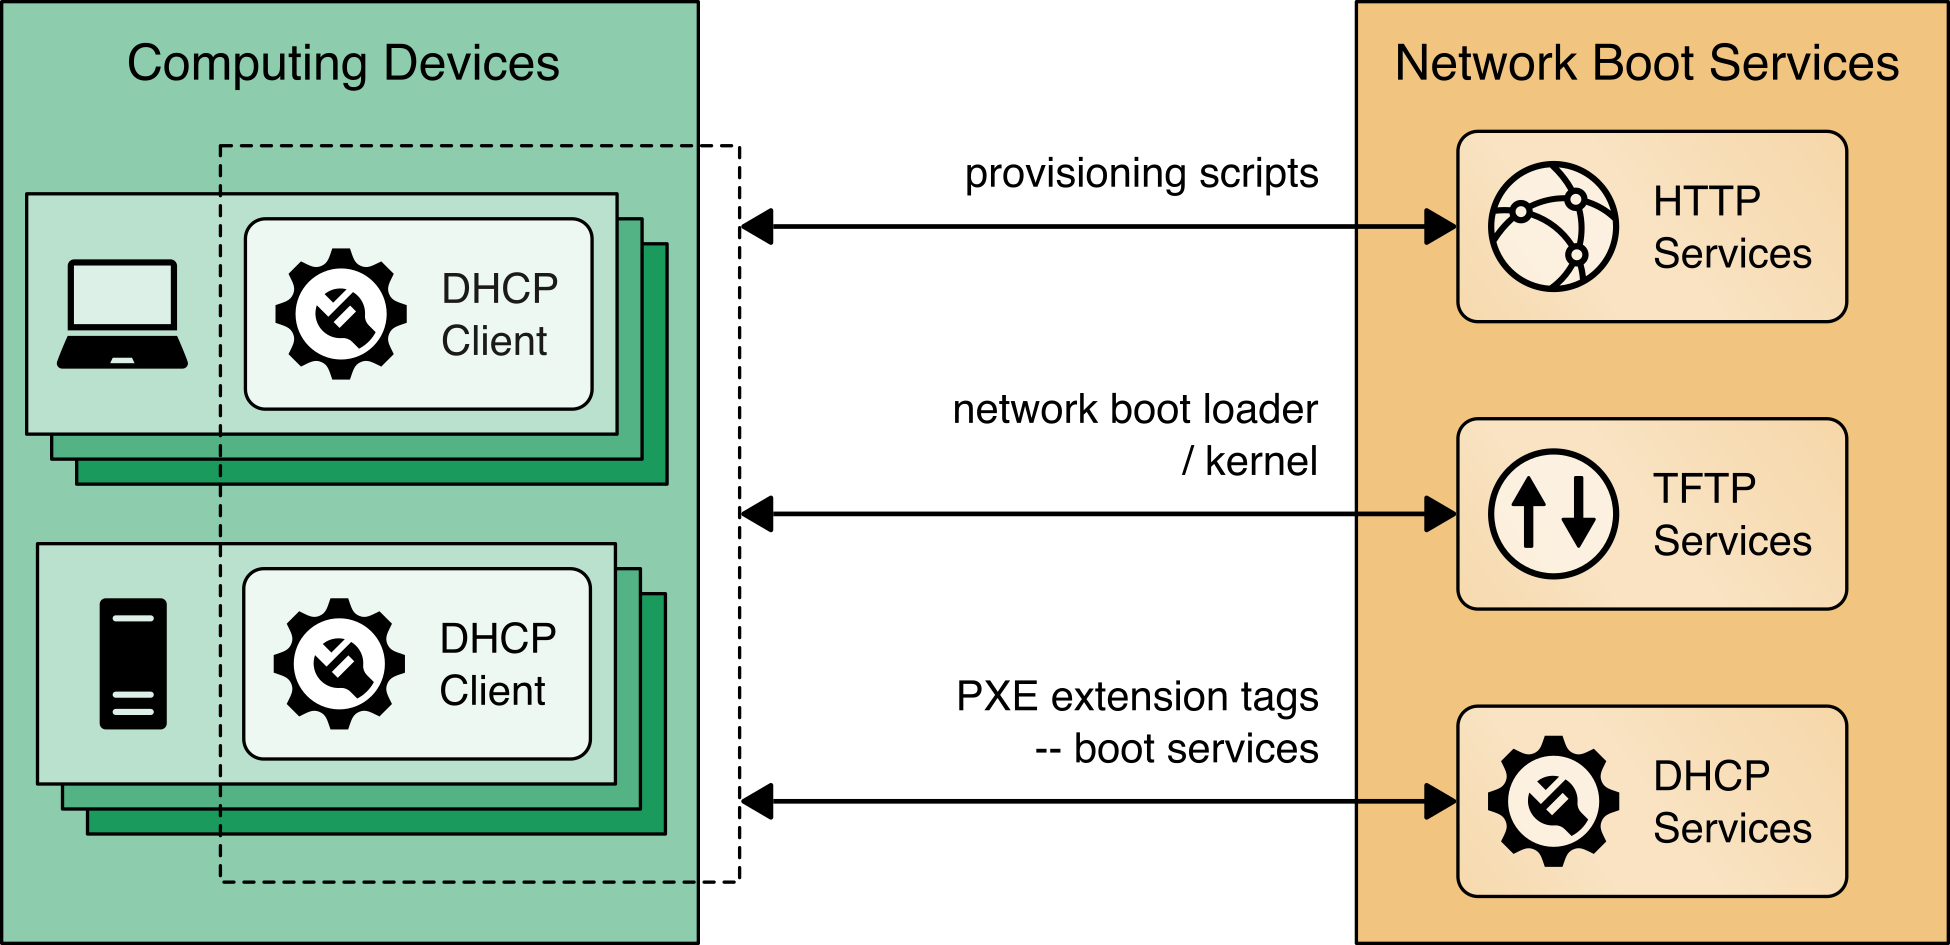 This figure depicts the logical flows between the network boot services and computing devices.